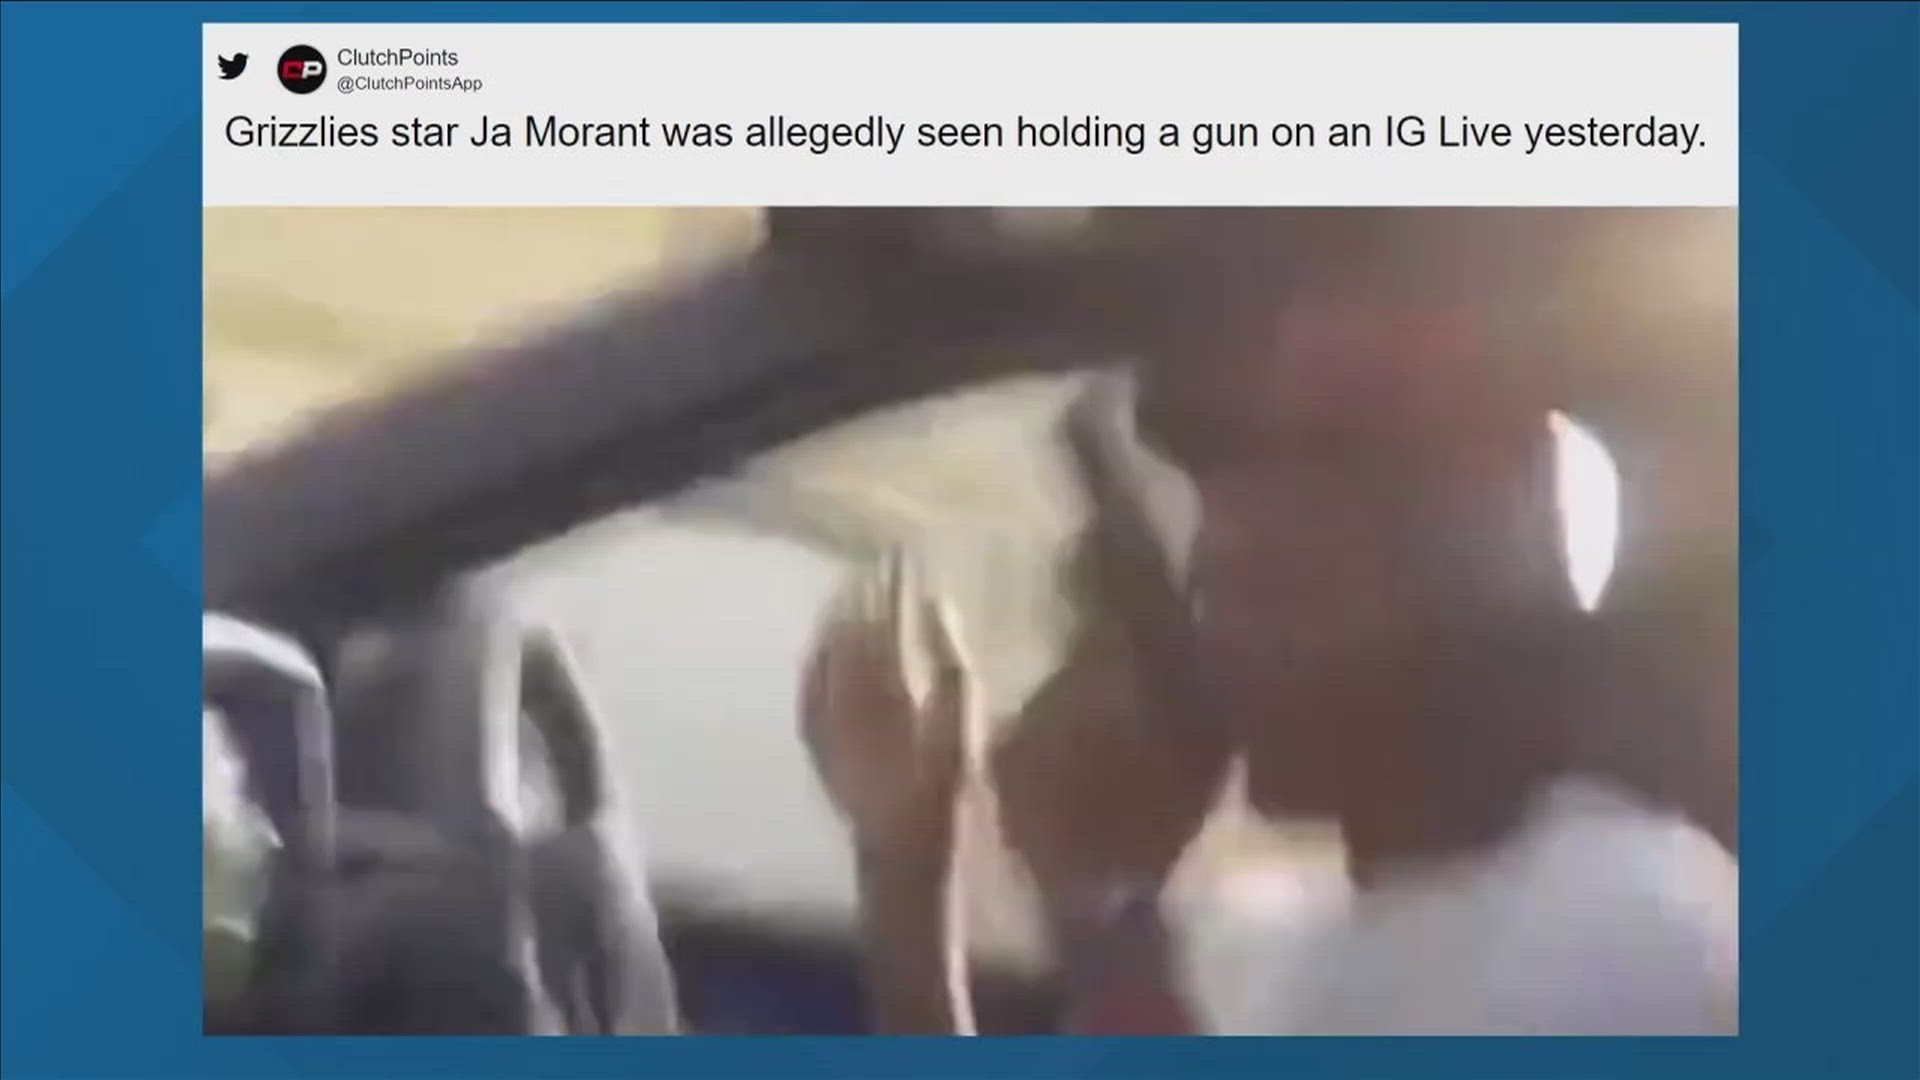 The Grizzlies suspended Ja Morant from "all team activities" pending League review after another social media post showed Morant holding what appeared to be a gun.